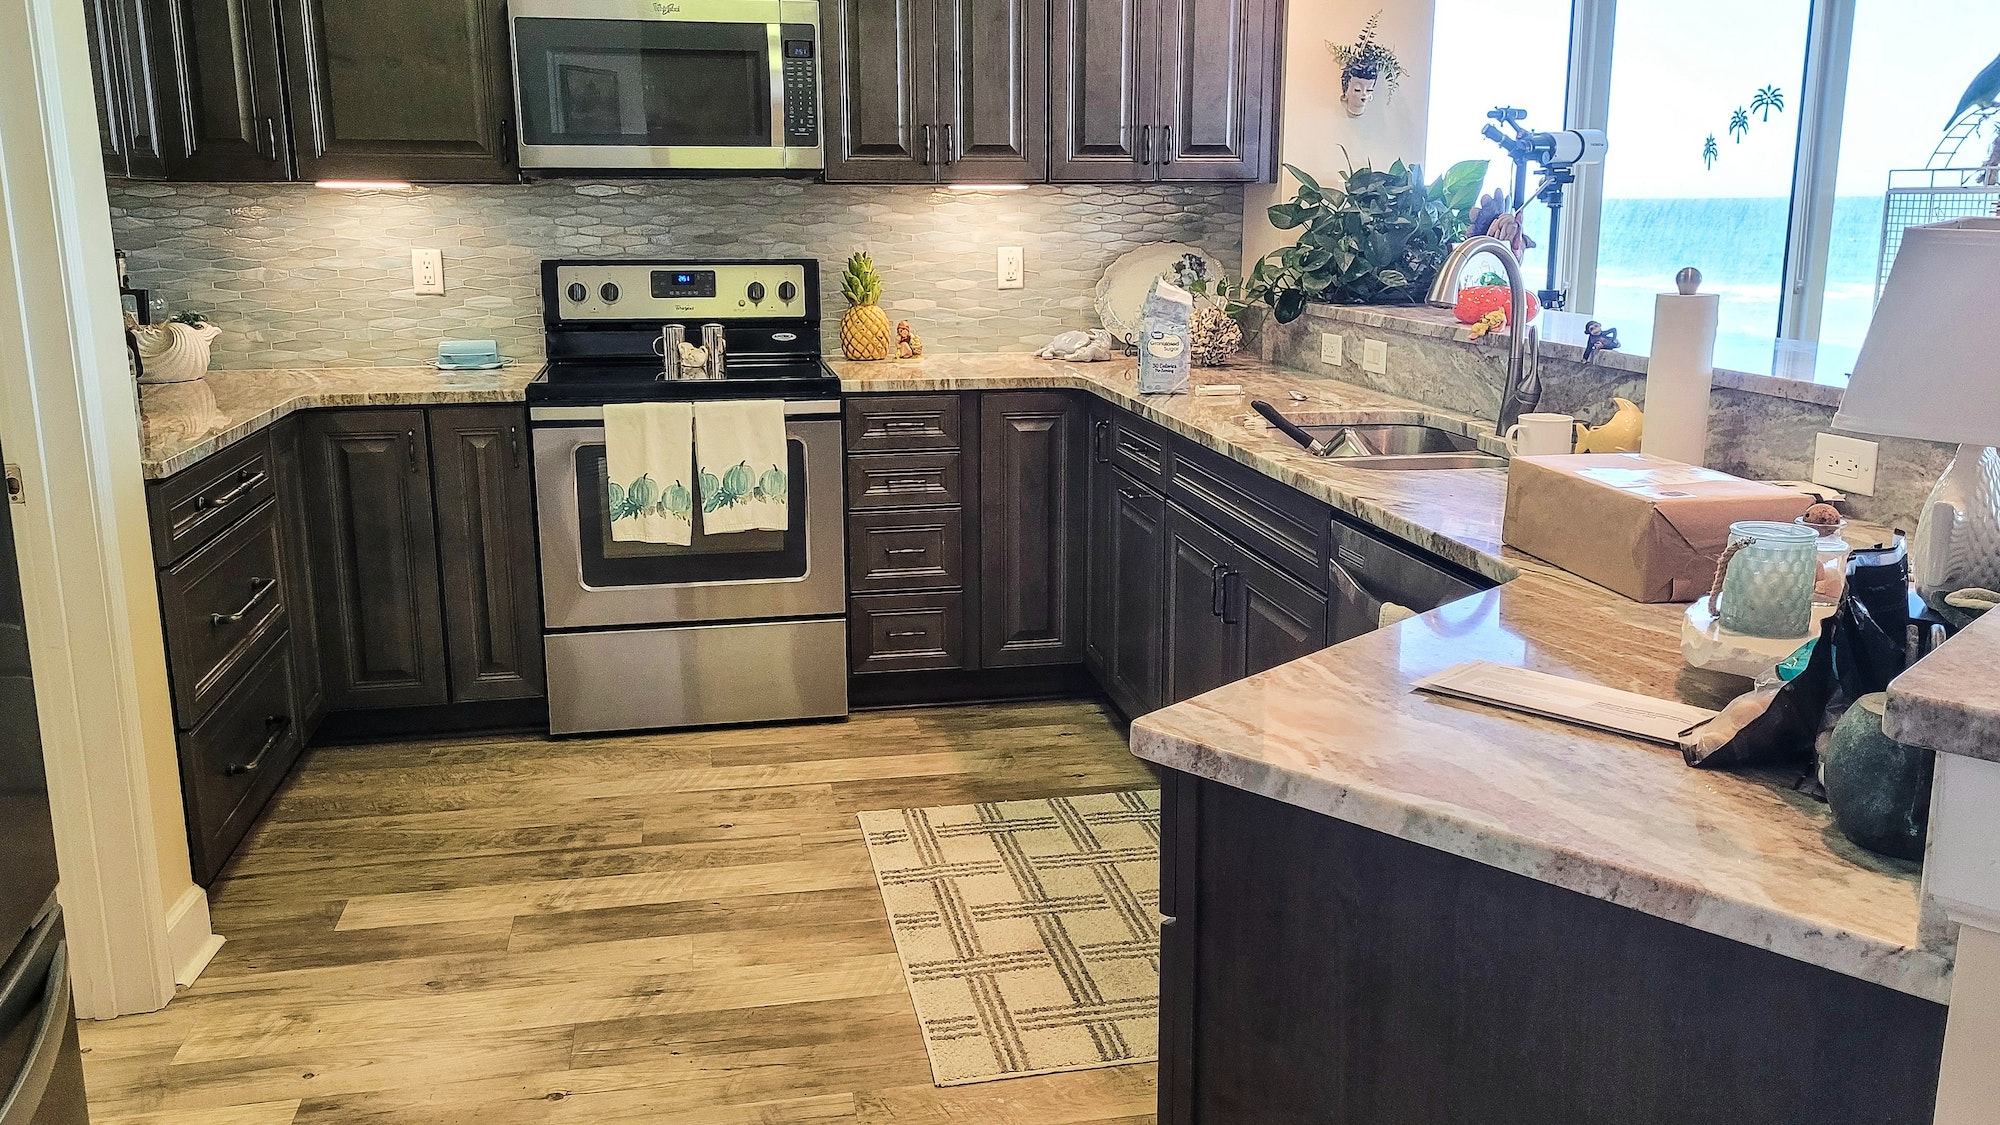 Beautiful kitchen remodel in vacation home at the beach in neutral color scheme.